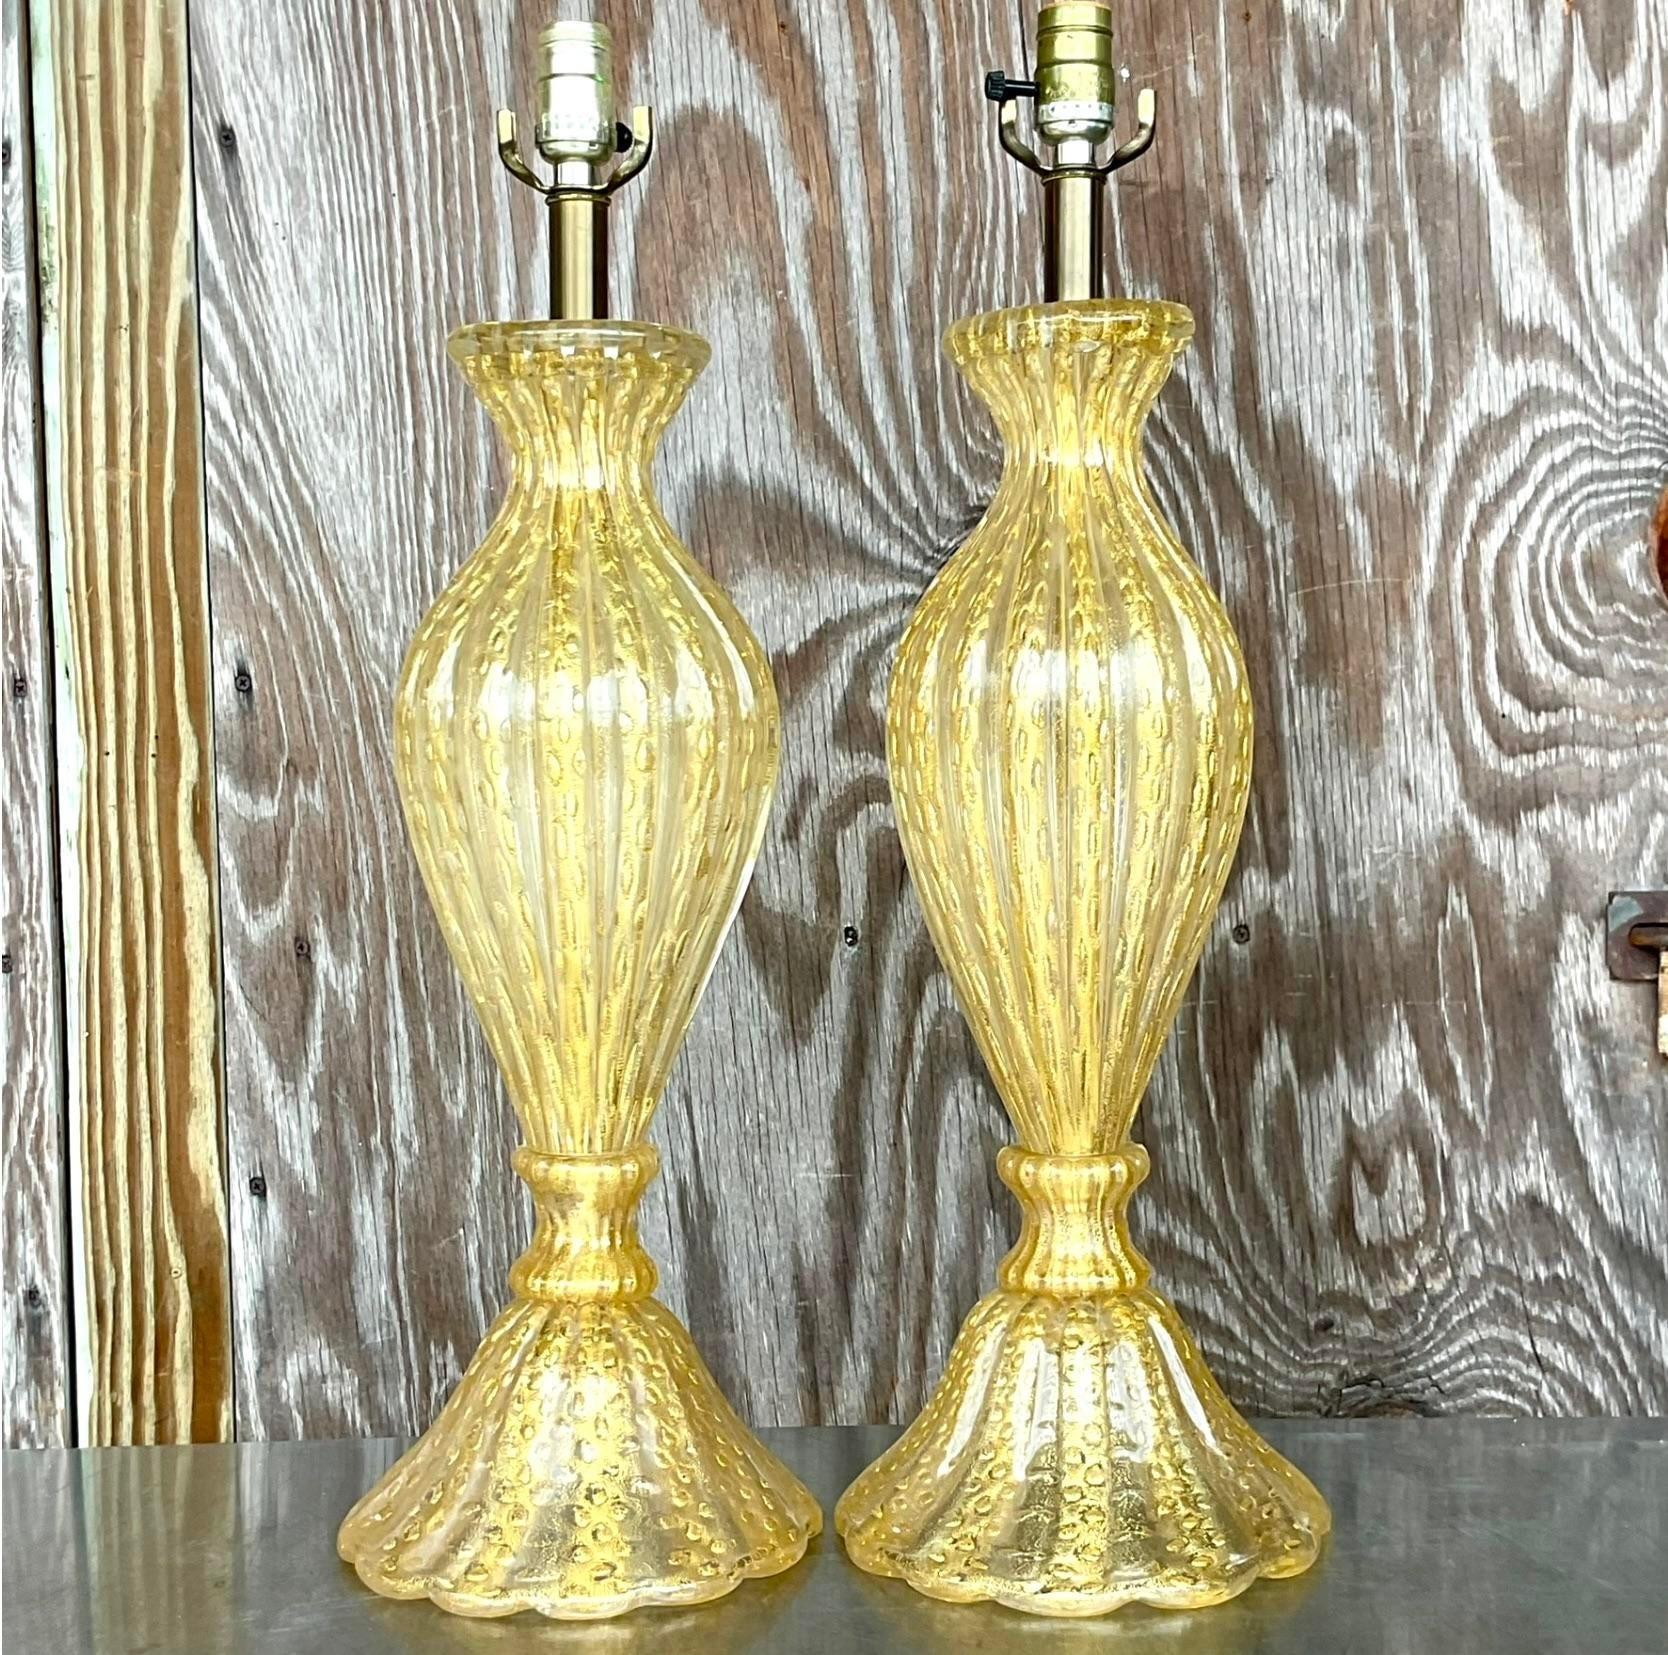 Metal Vintage Regency Restored Murano Glass Table Lamps - a Pair For Sale